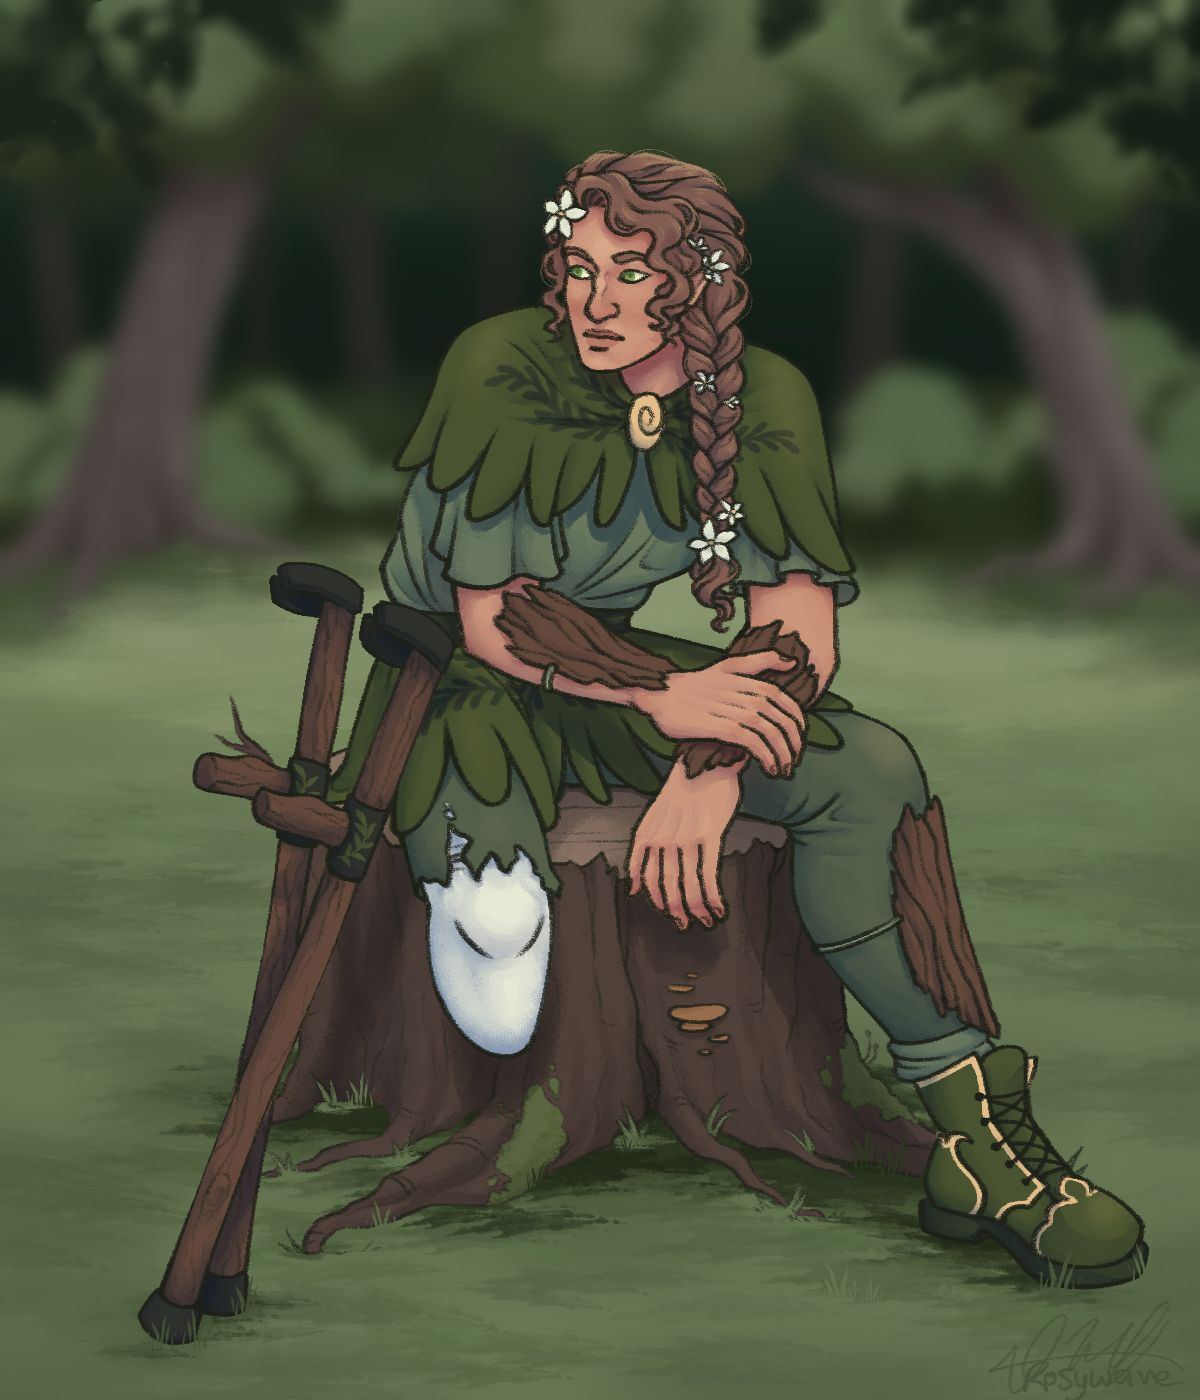 A full illustration of a tanned character with long braided hair sitting on a tree stump. There are flowers in her hair. Her leg is amputated below the knee there are forearm crutches leaning against her.